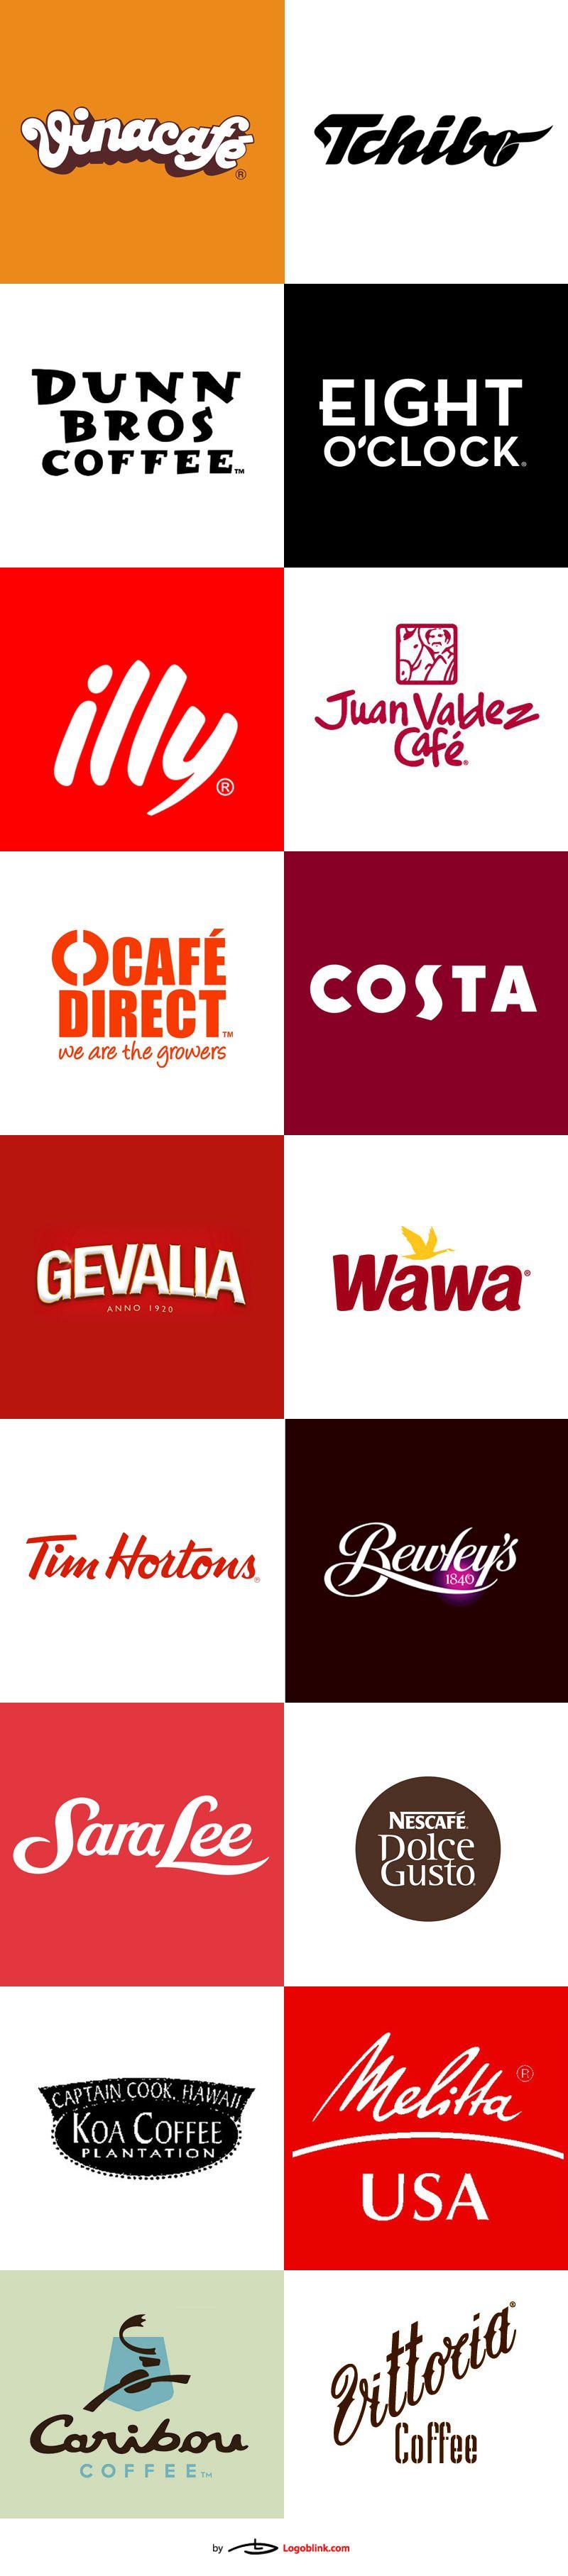 Famous Coffee Logo - Famous coffee logos from around the world. Design. Coffee logo